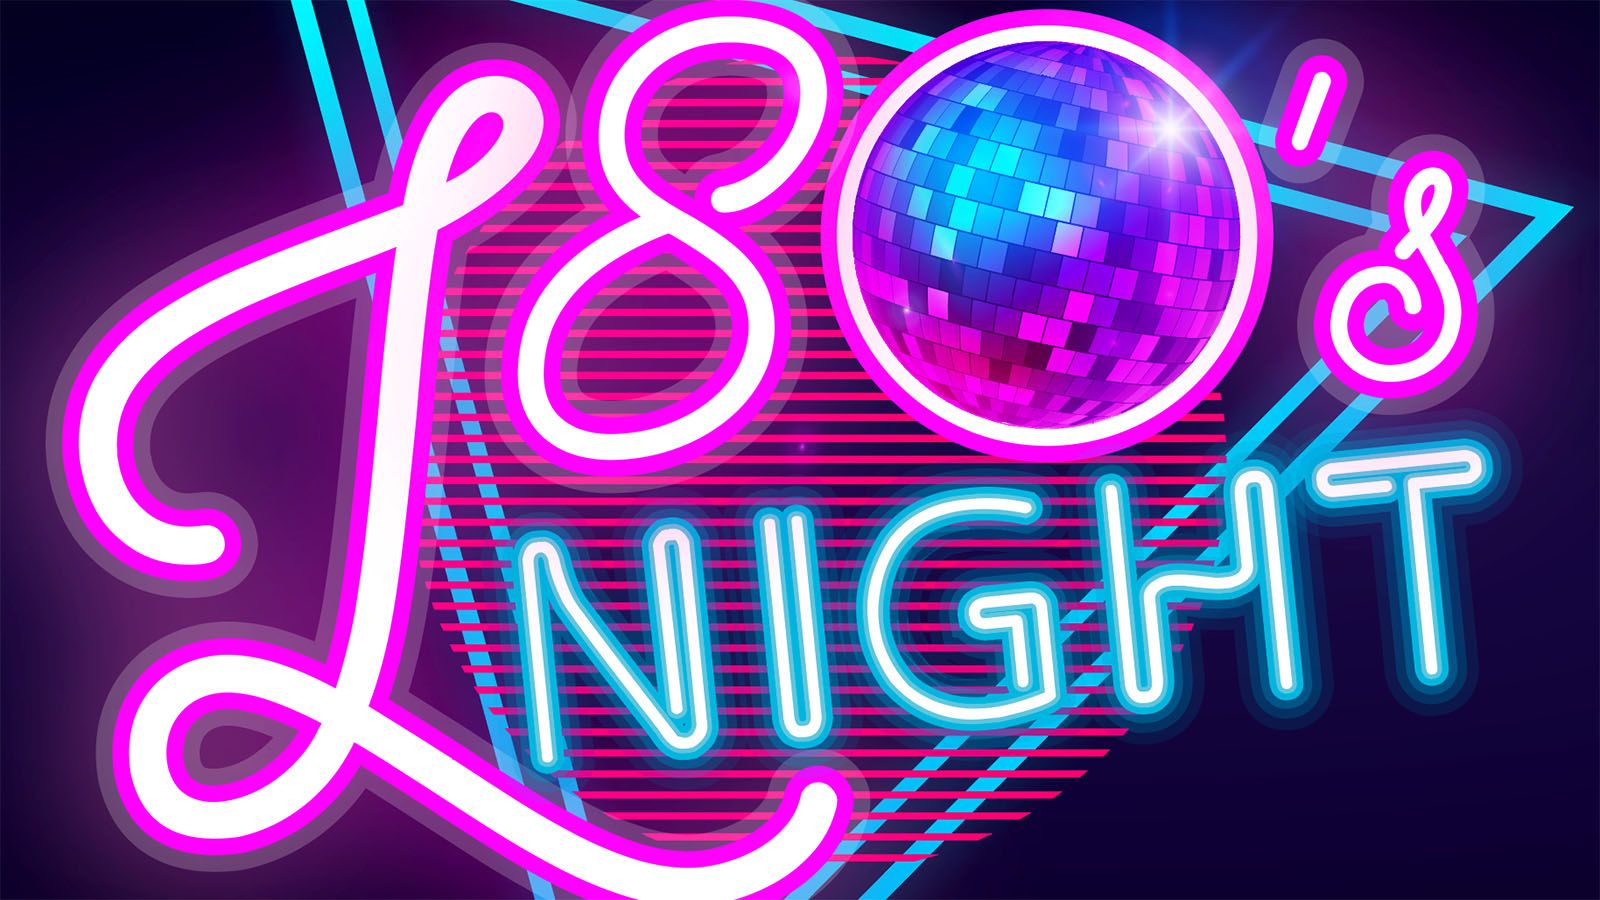 Local supergroup L80's Night will debut July 22 at Fort Wayne Pride.